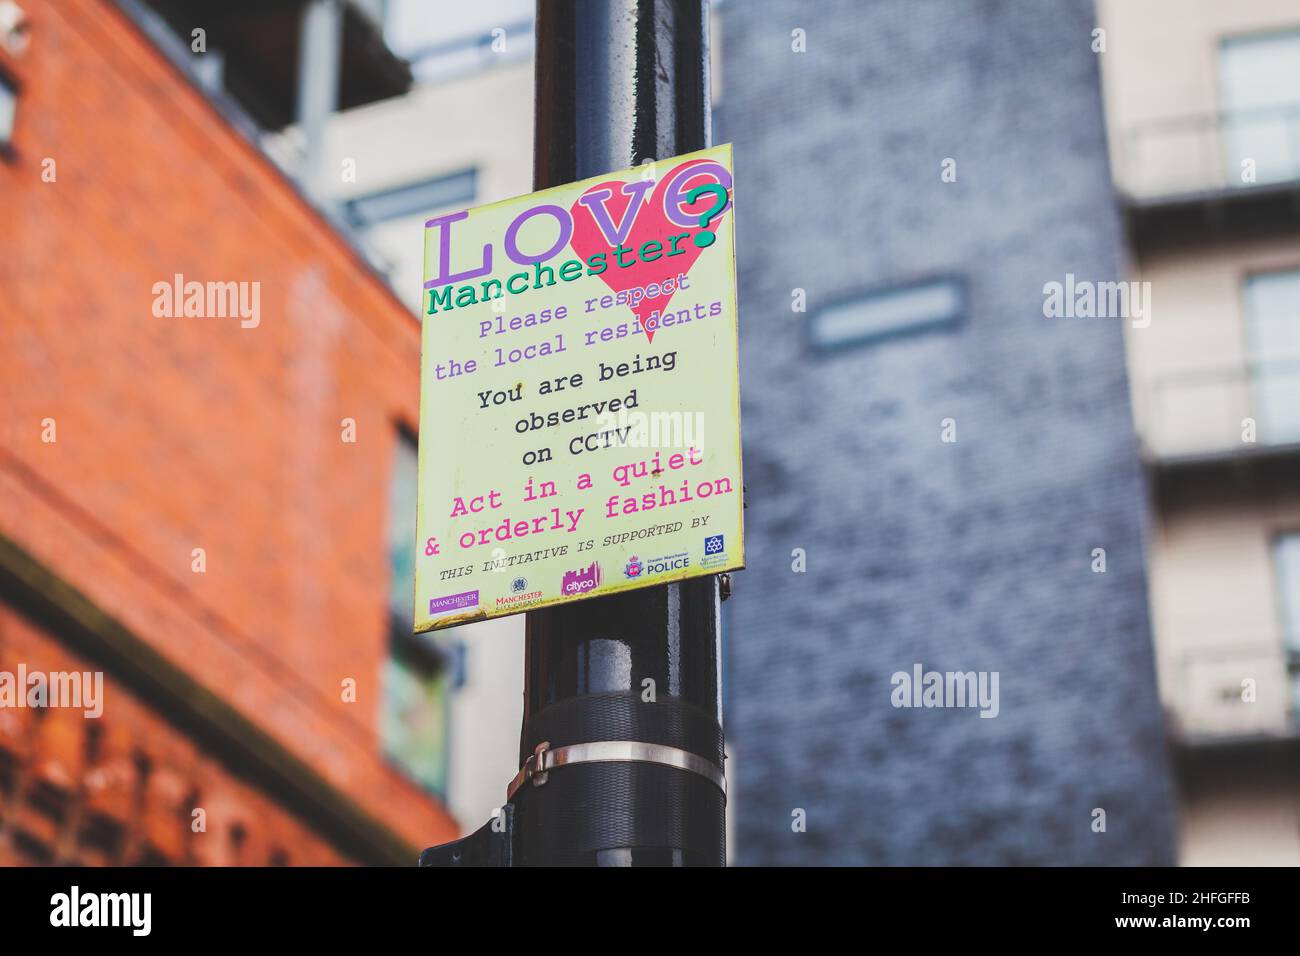 A street sign in Manchesters Northern Quarter promoting respect for the local neighbourhood displaying CCTV observance Stock Photo